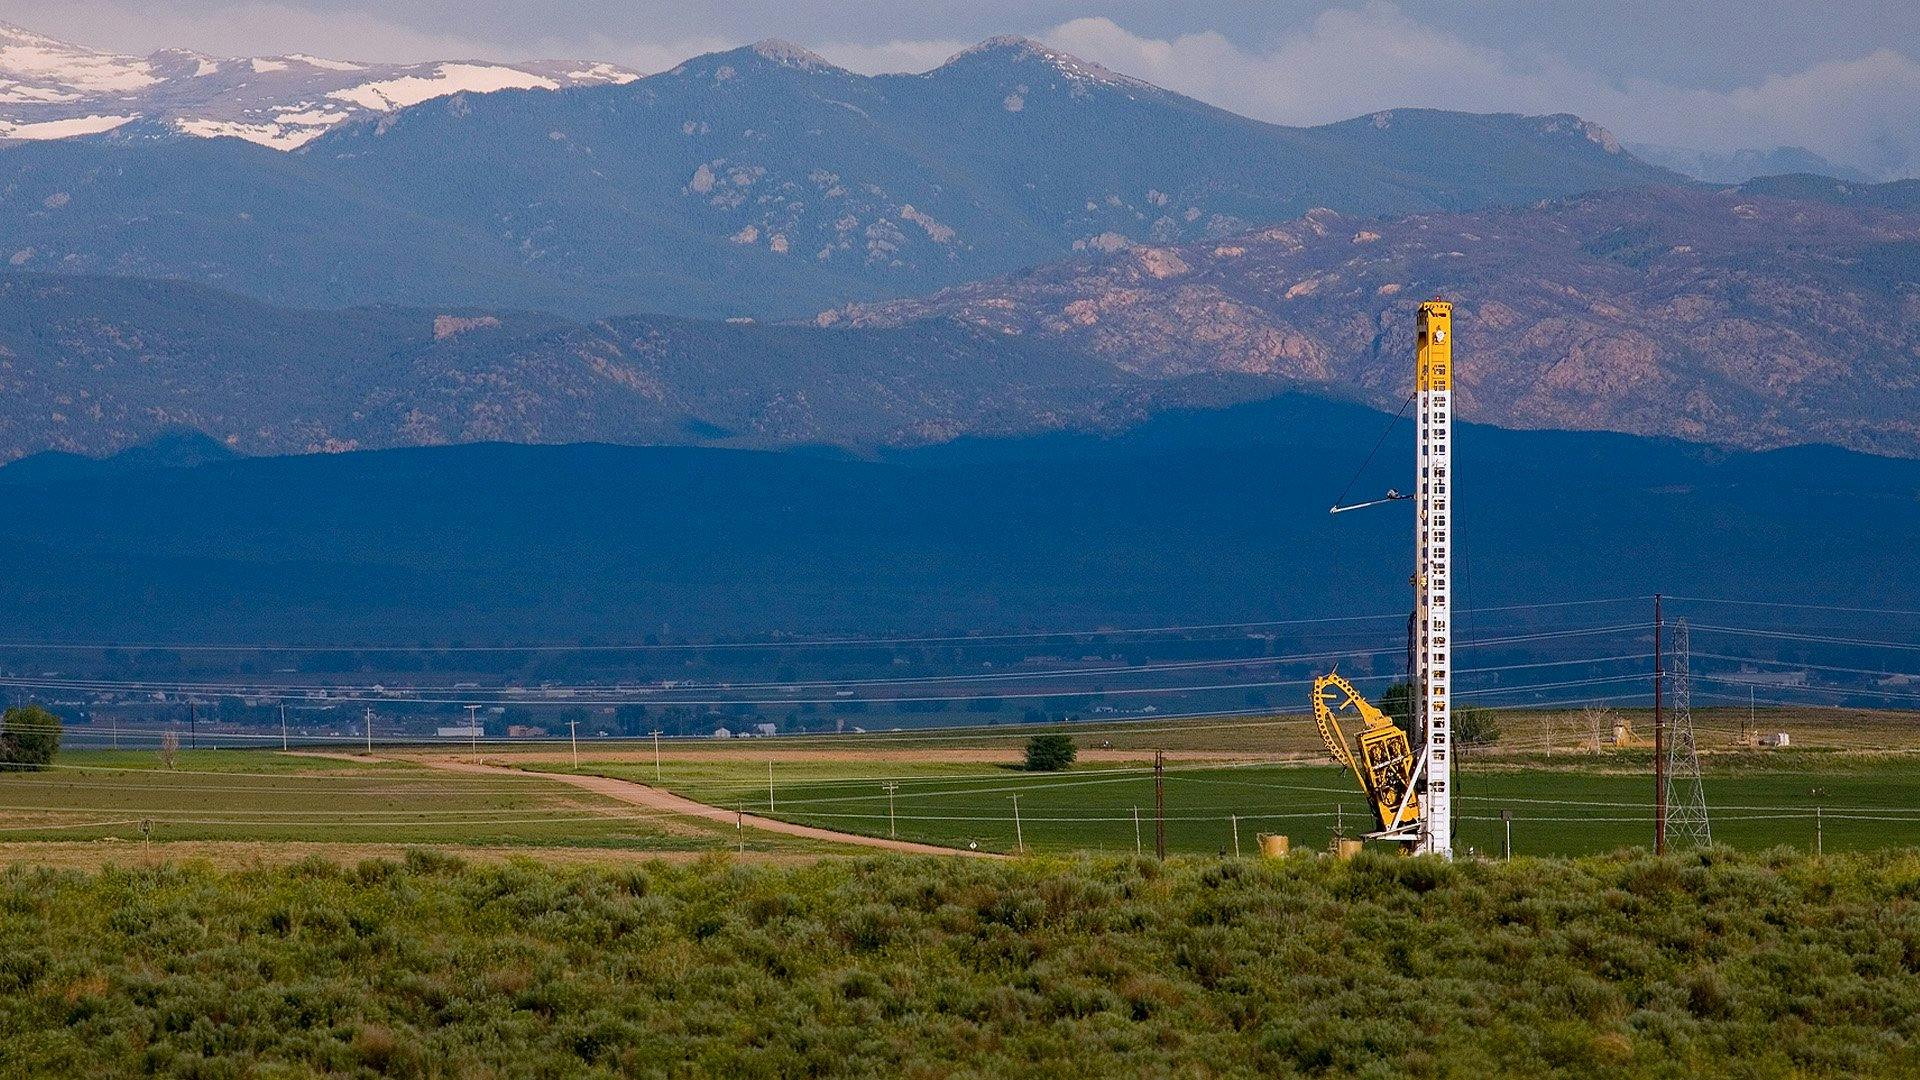 Mountains of Colorado with rig in foreground